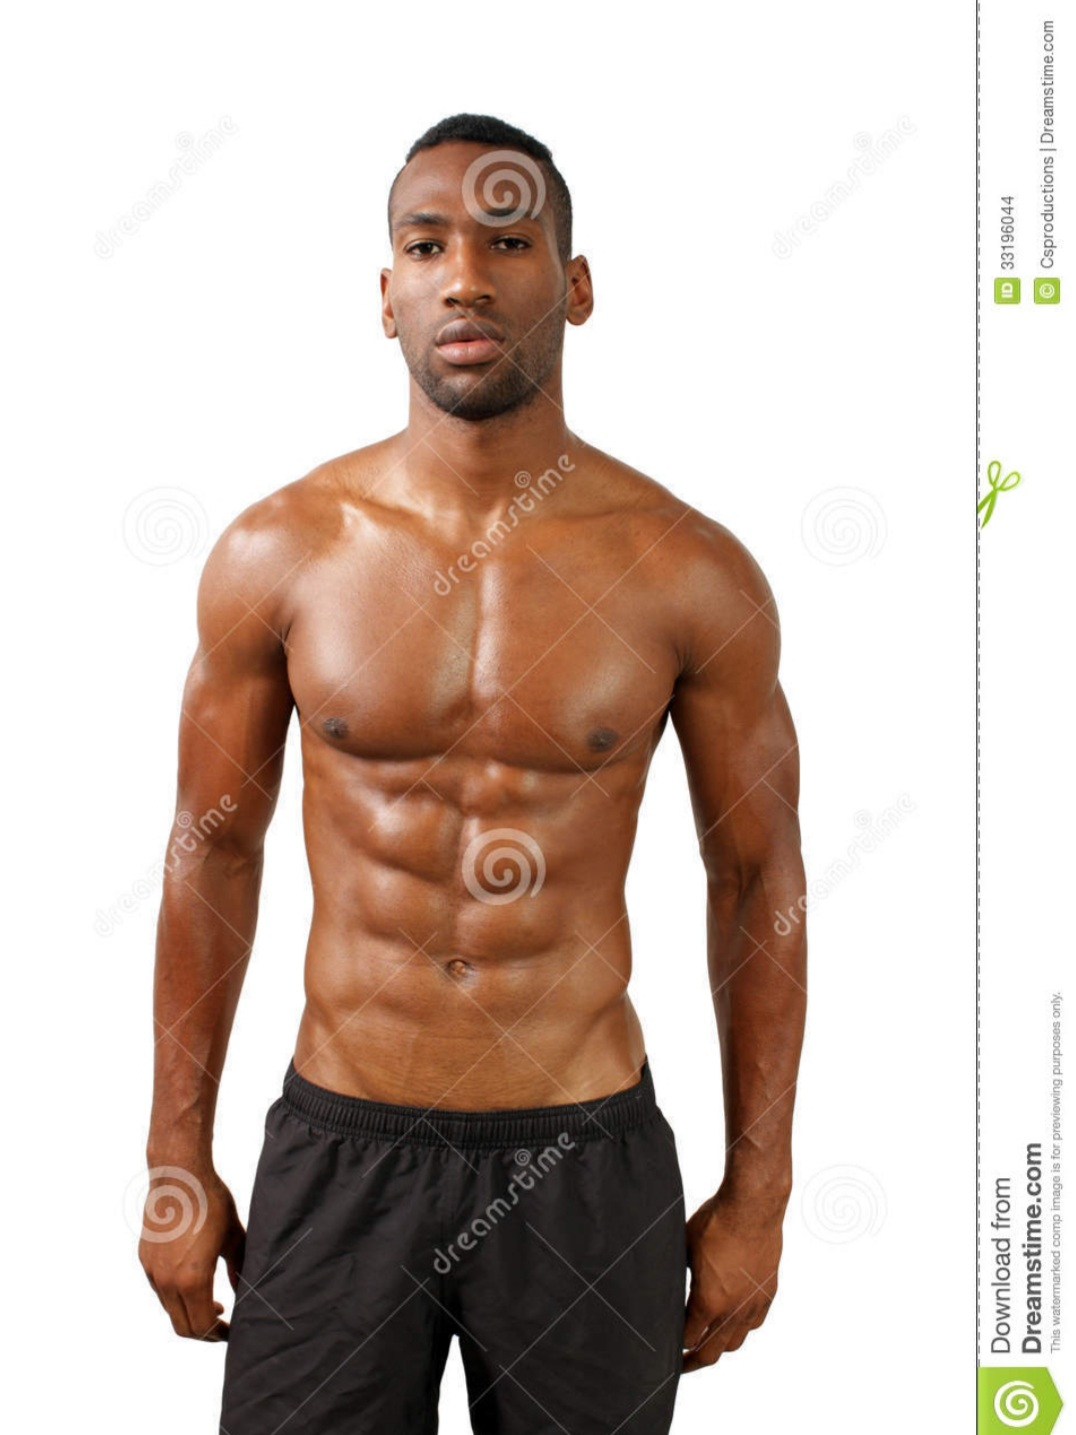 99521 Muscle Black Guy Images, Stock Photos & Vectors